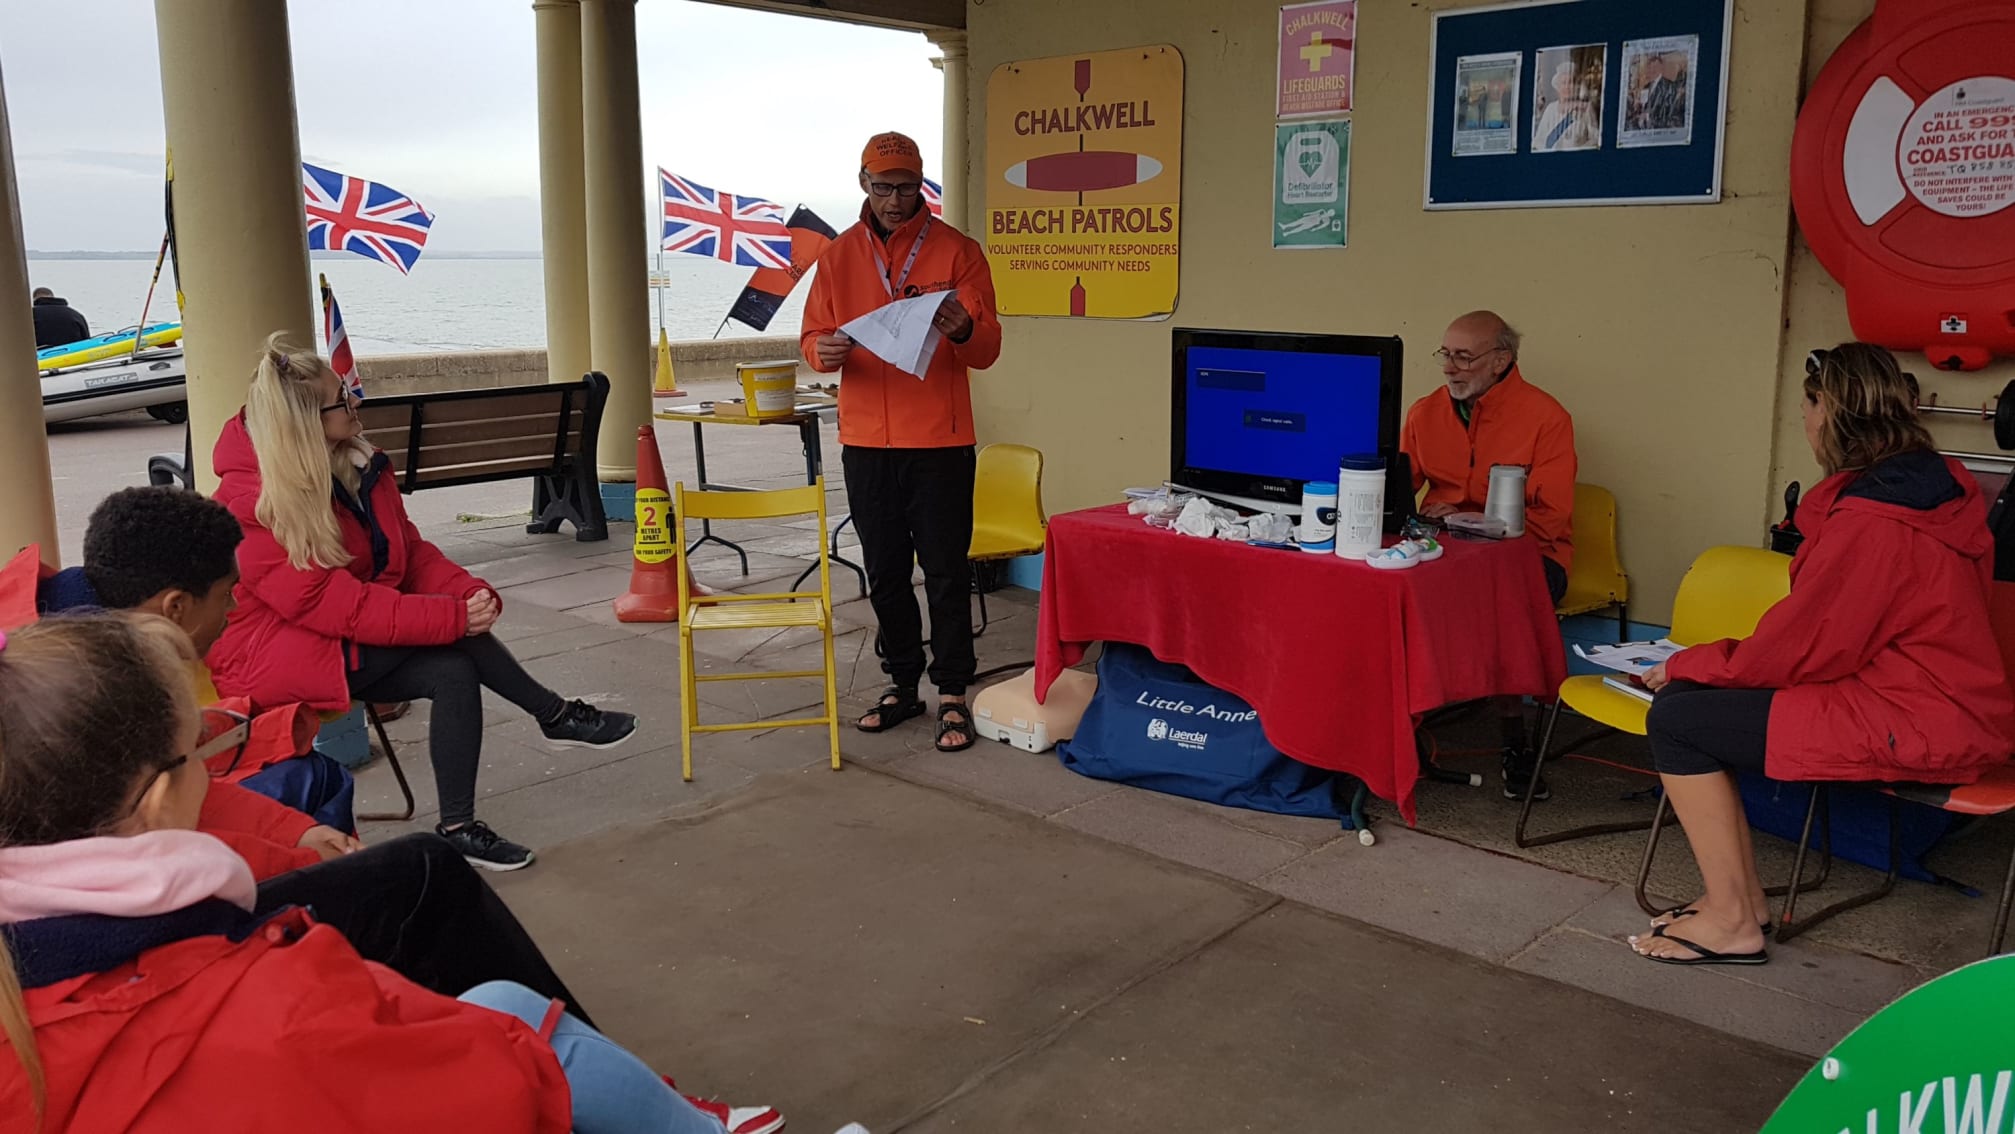 Chalkwell Lifeguards Club first aid course